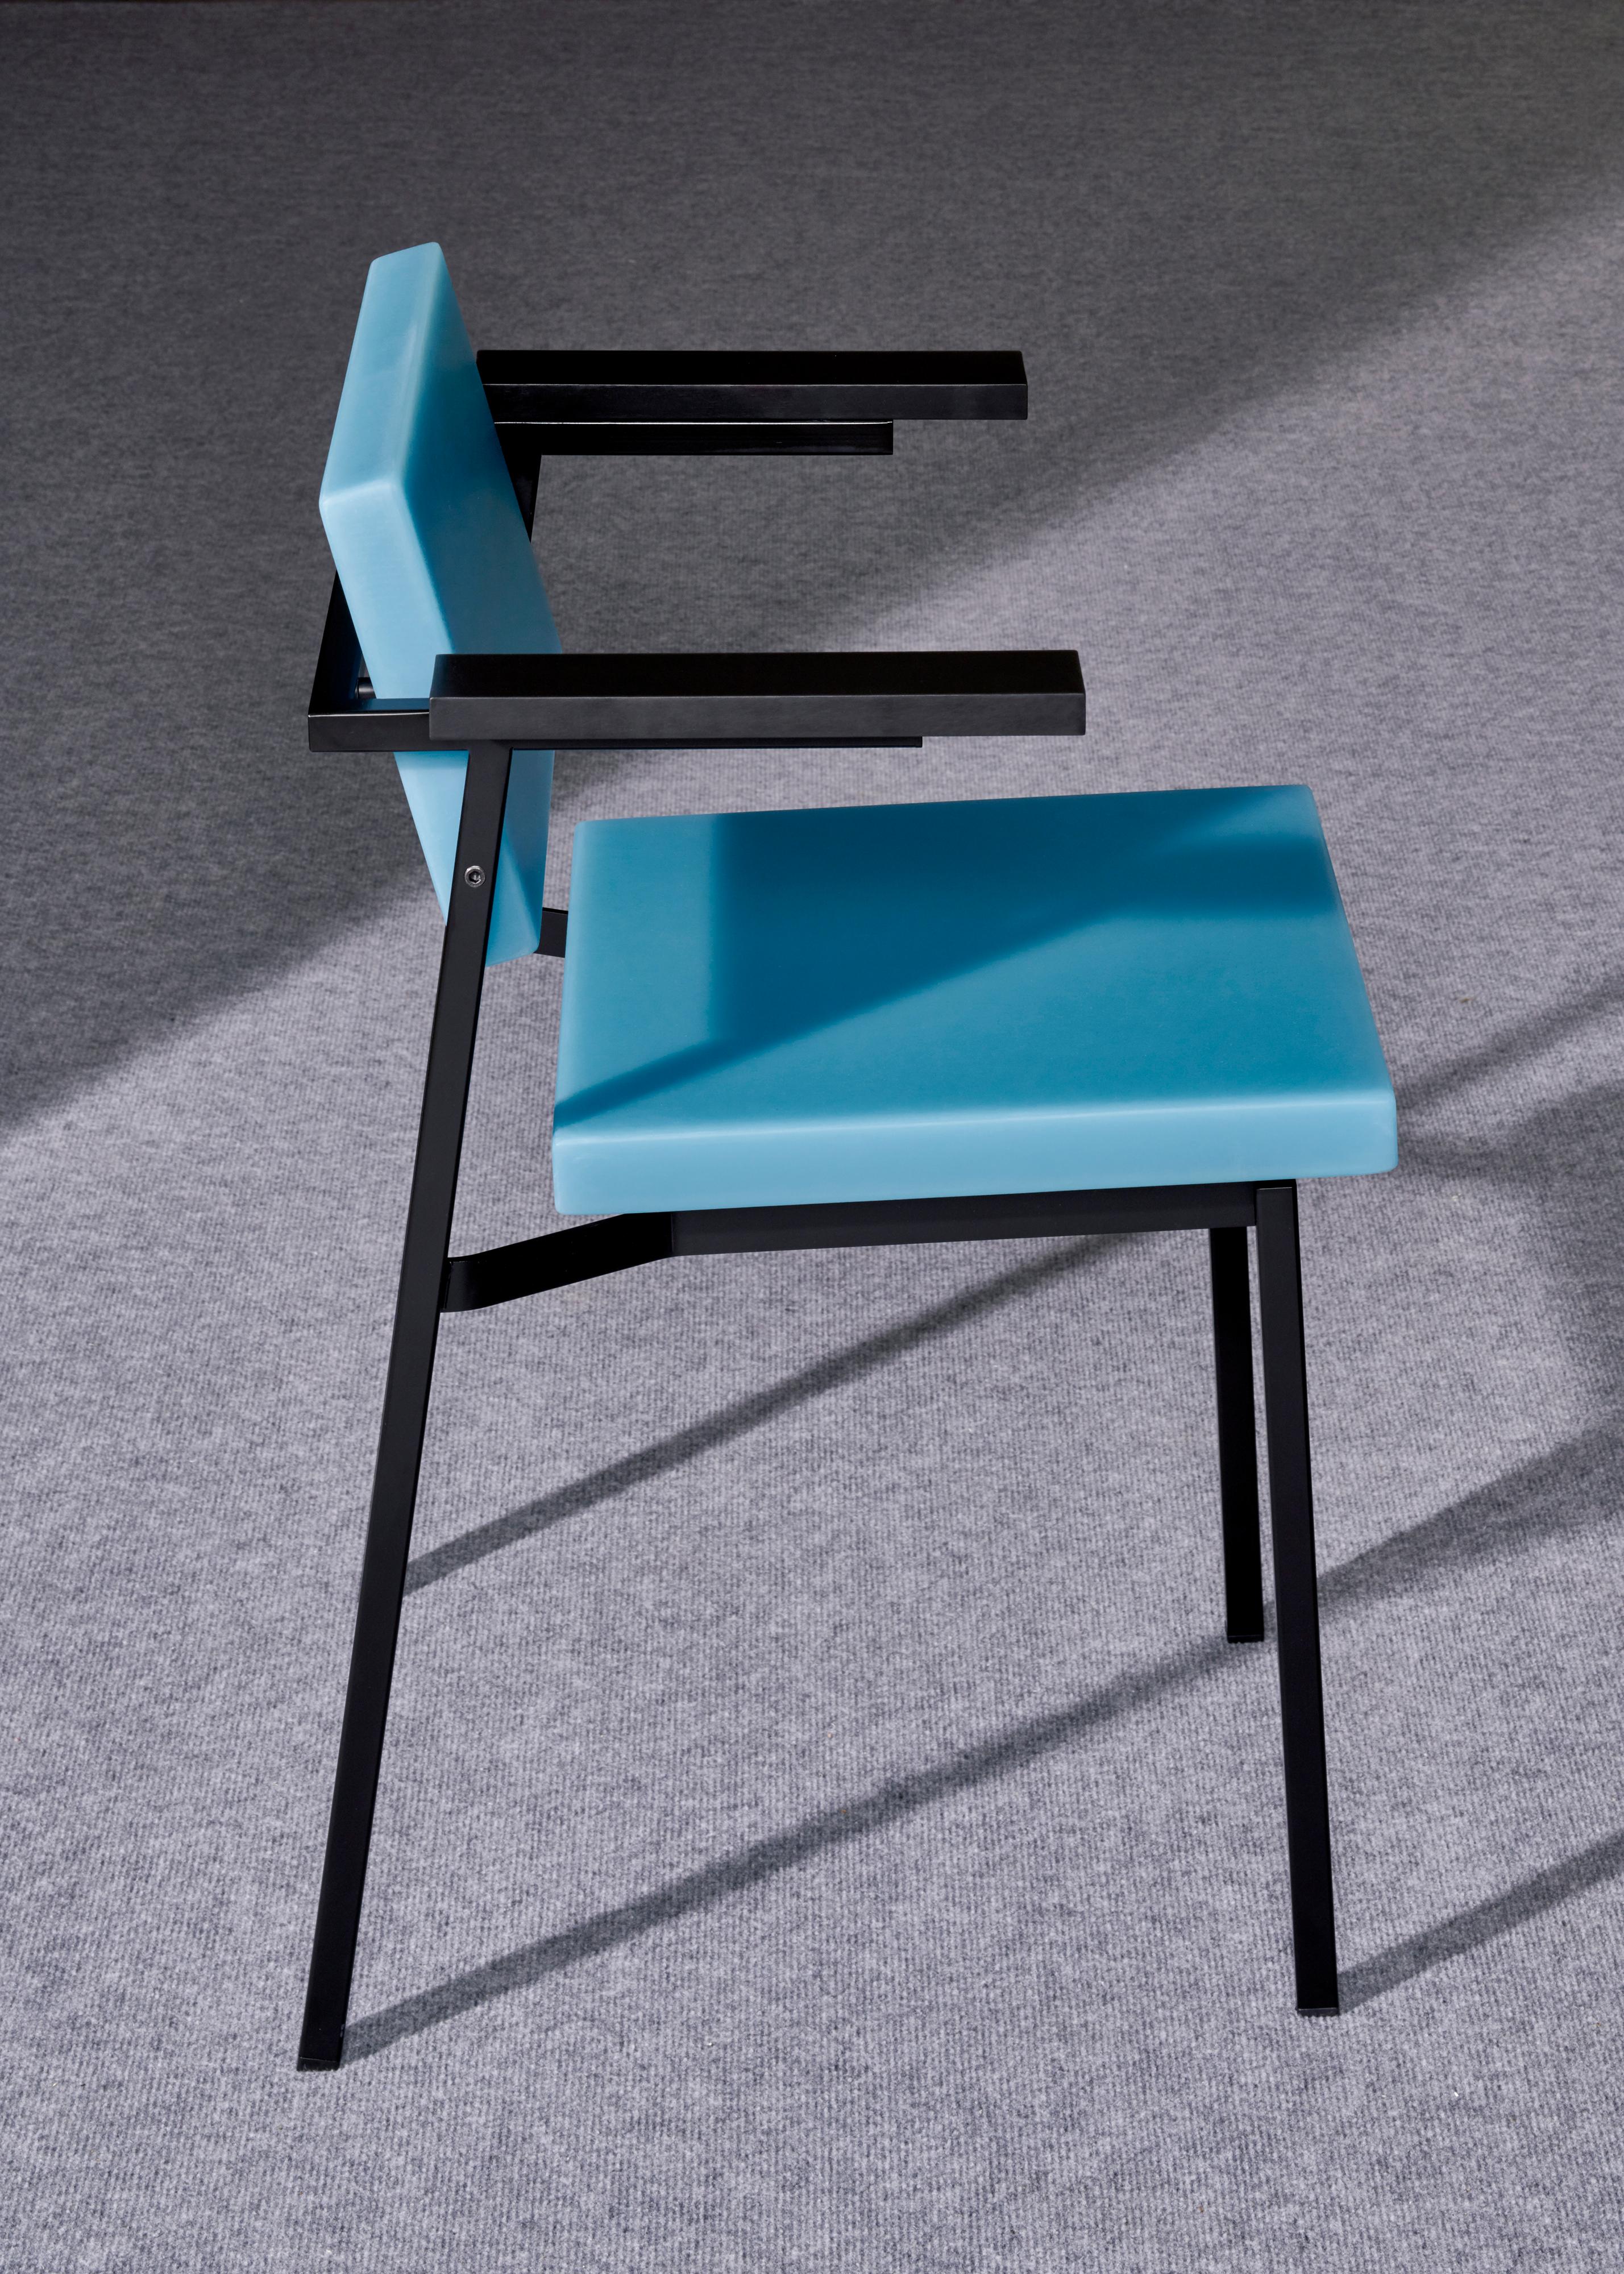 Powder-Coated Contemporary Resin SE69 Chair 2019 by Sabine Marcelis For Sale